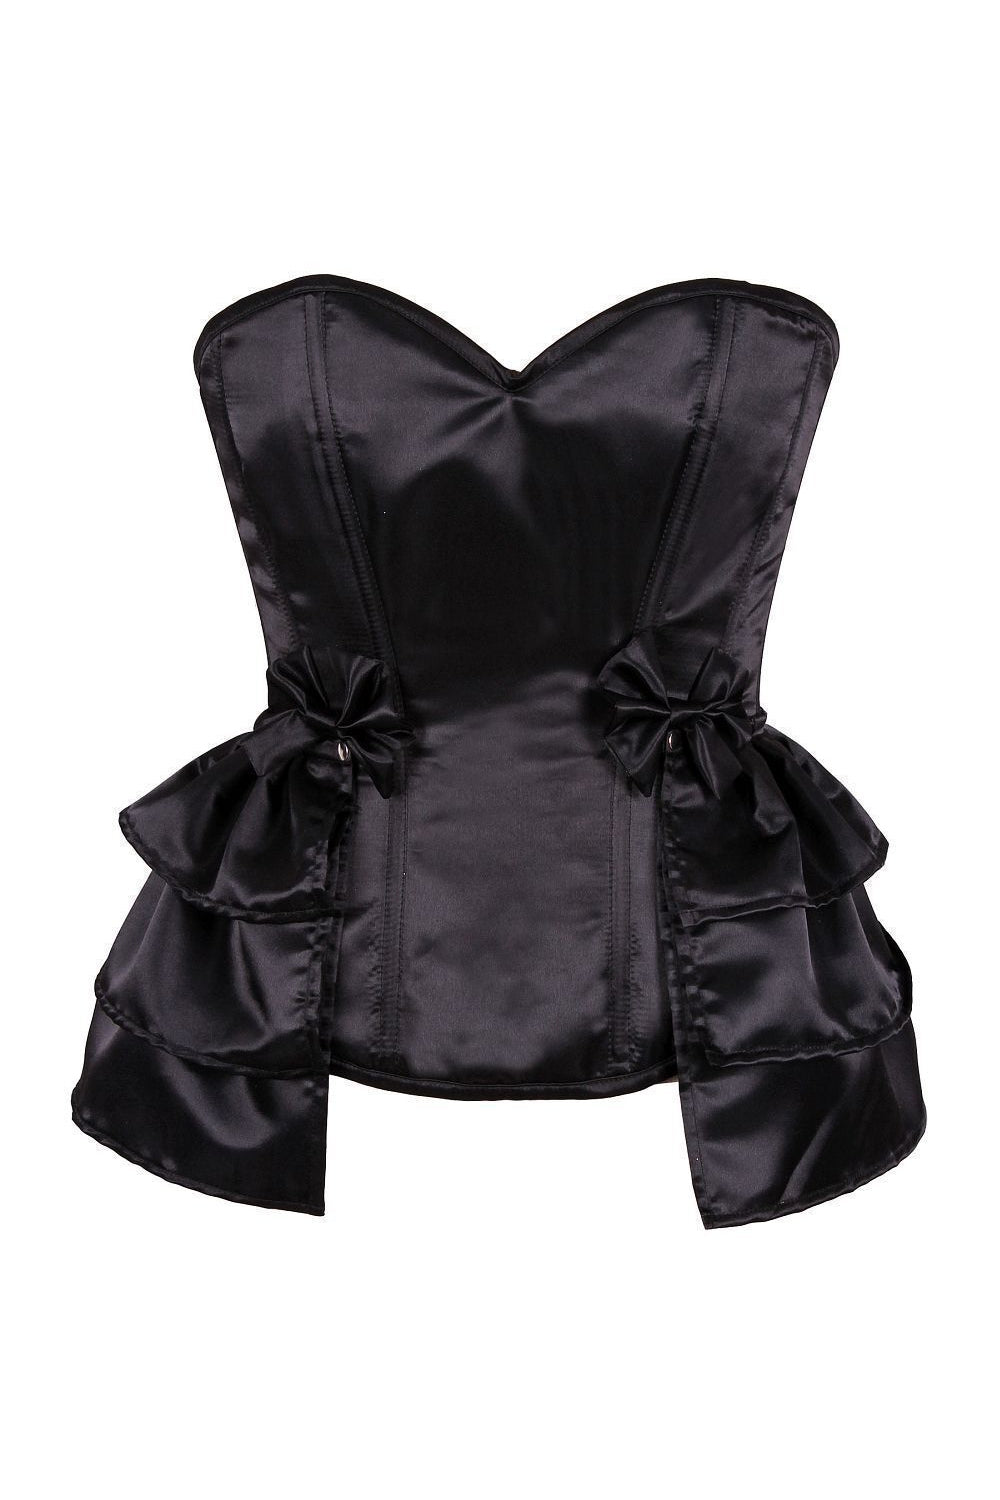 Lavish Black Satin Corset with Removable Snap on Skirt-Daisy Corsets-SEXYSHOES.COM